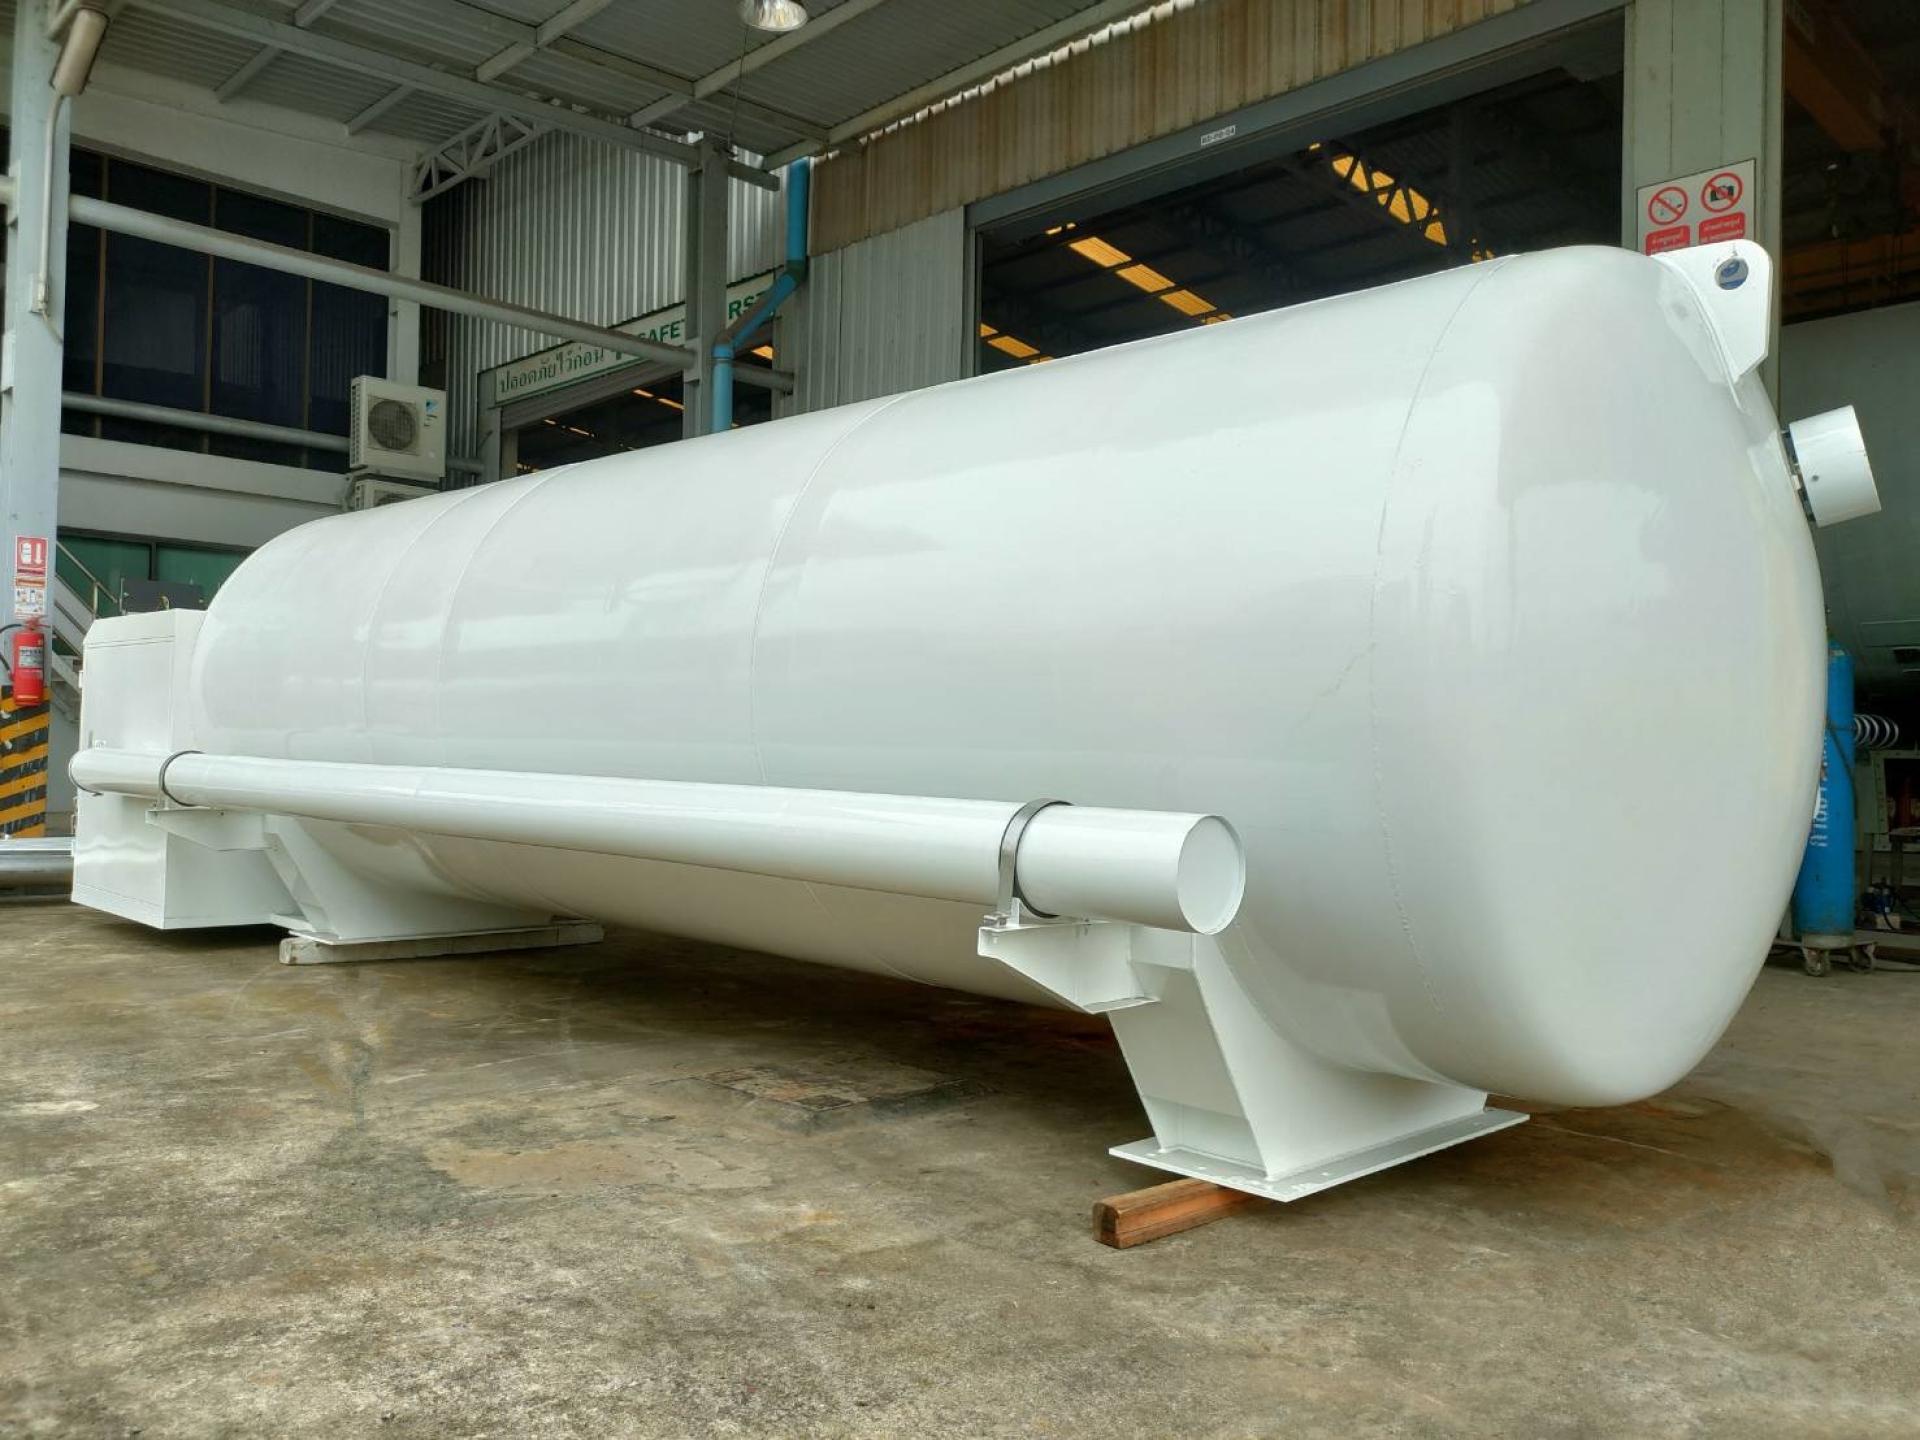 Small rigid tank with pump for Airgas delivery